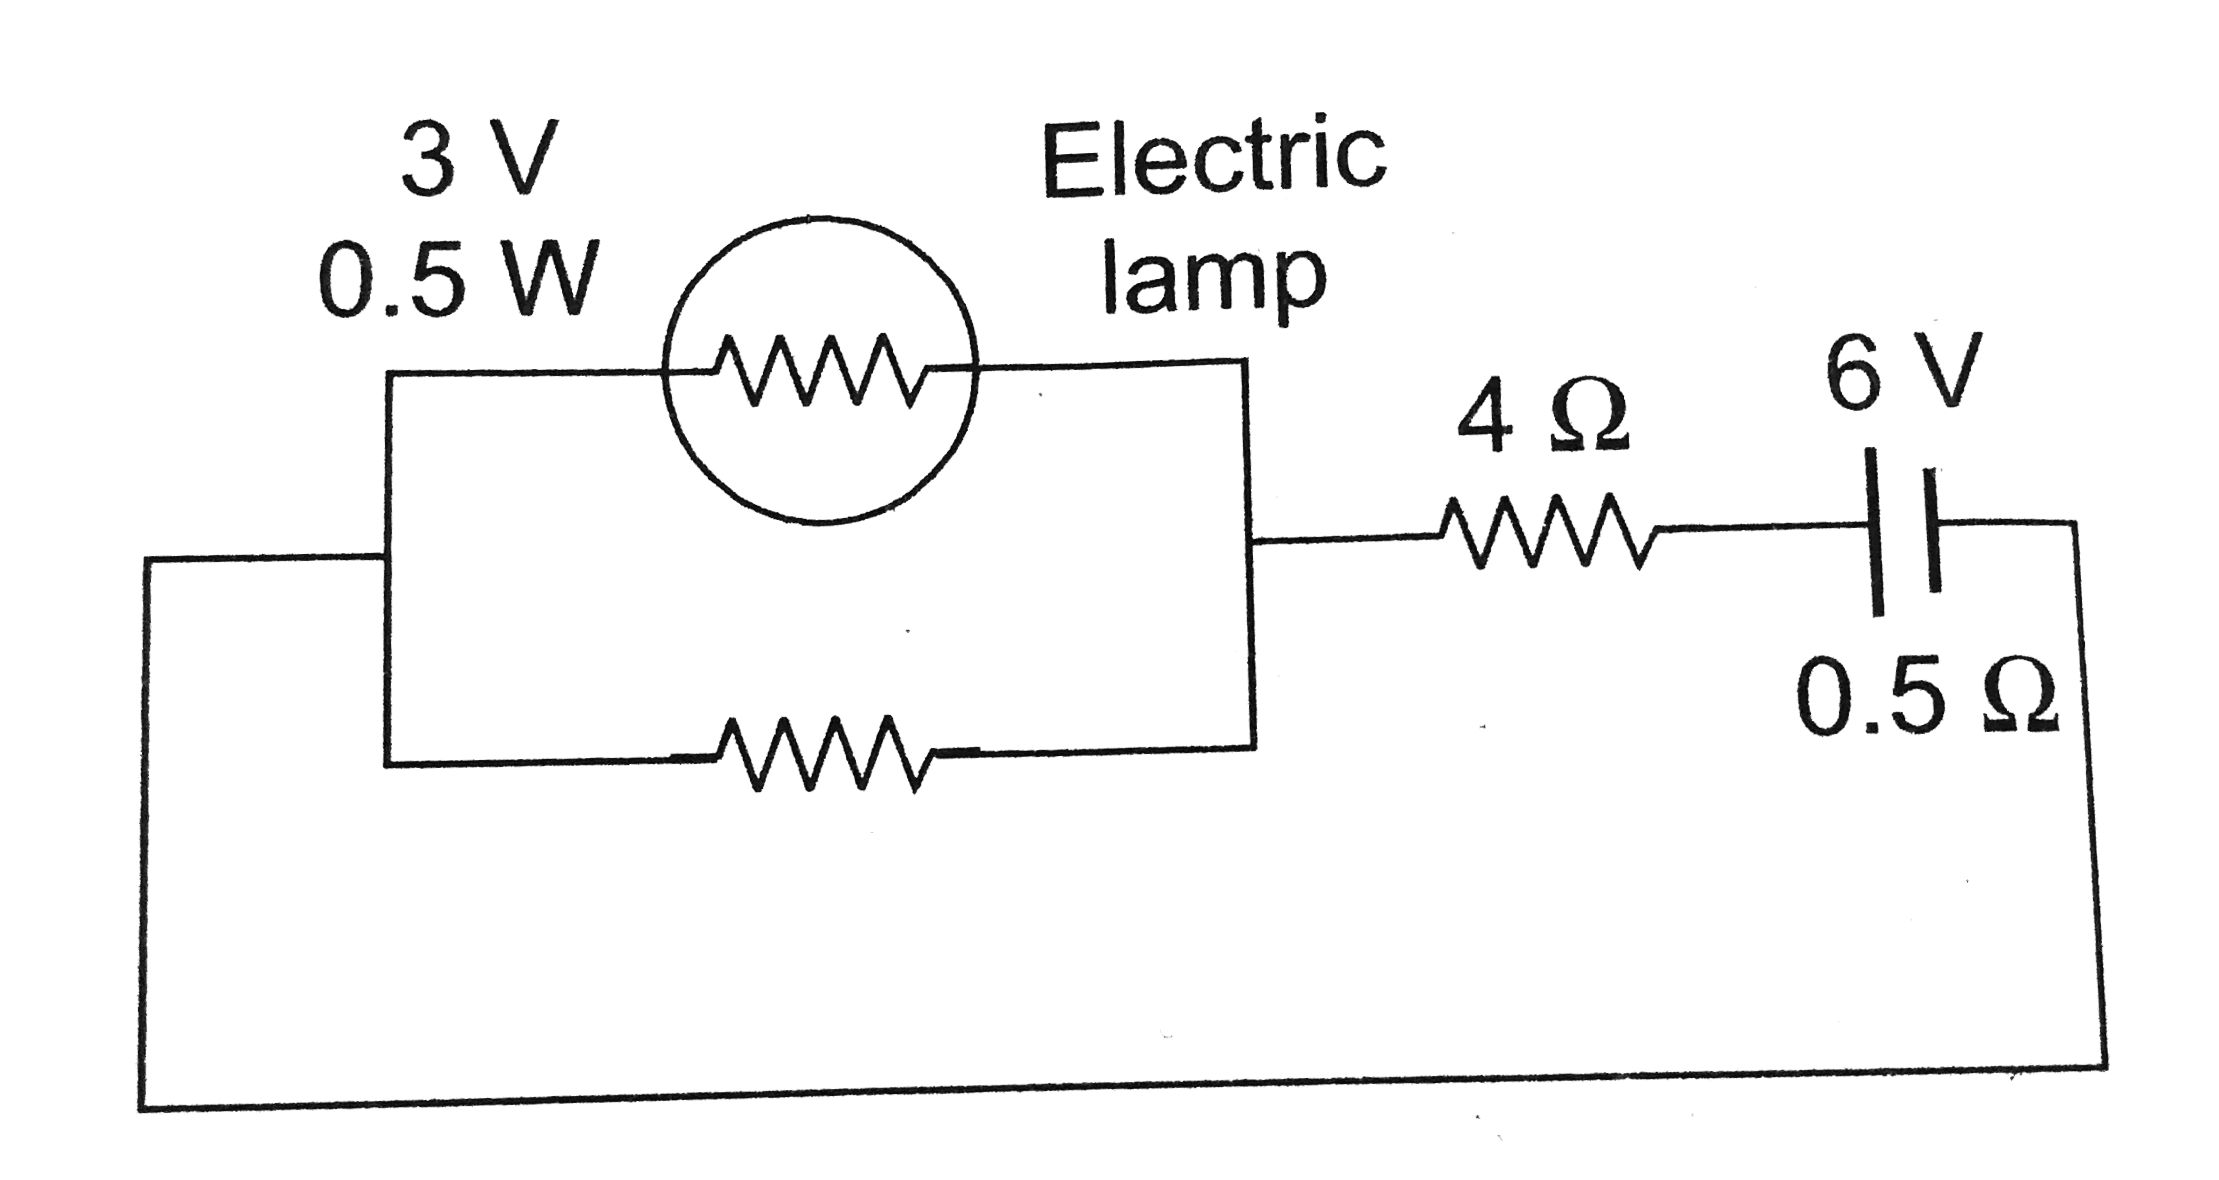 What should be the value of resistance R in the circuit shown in figure so that the electric bulb consumes the rated power?